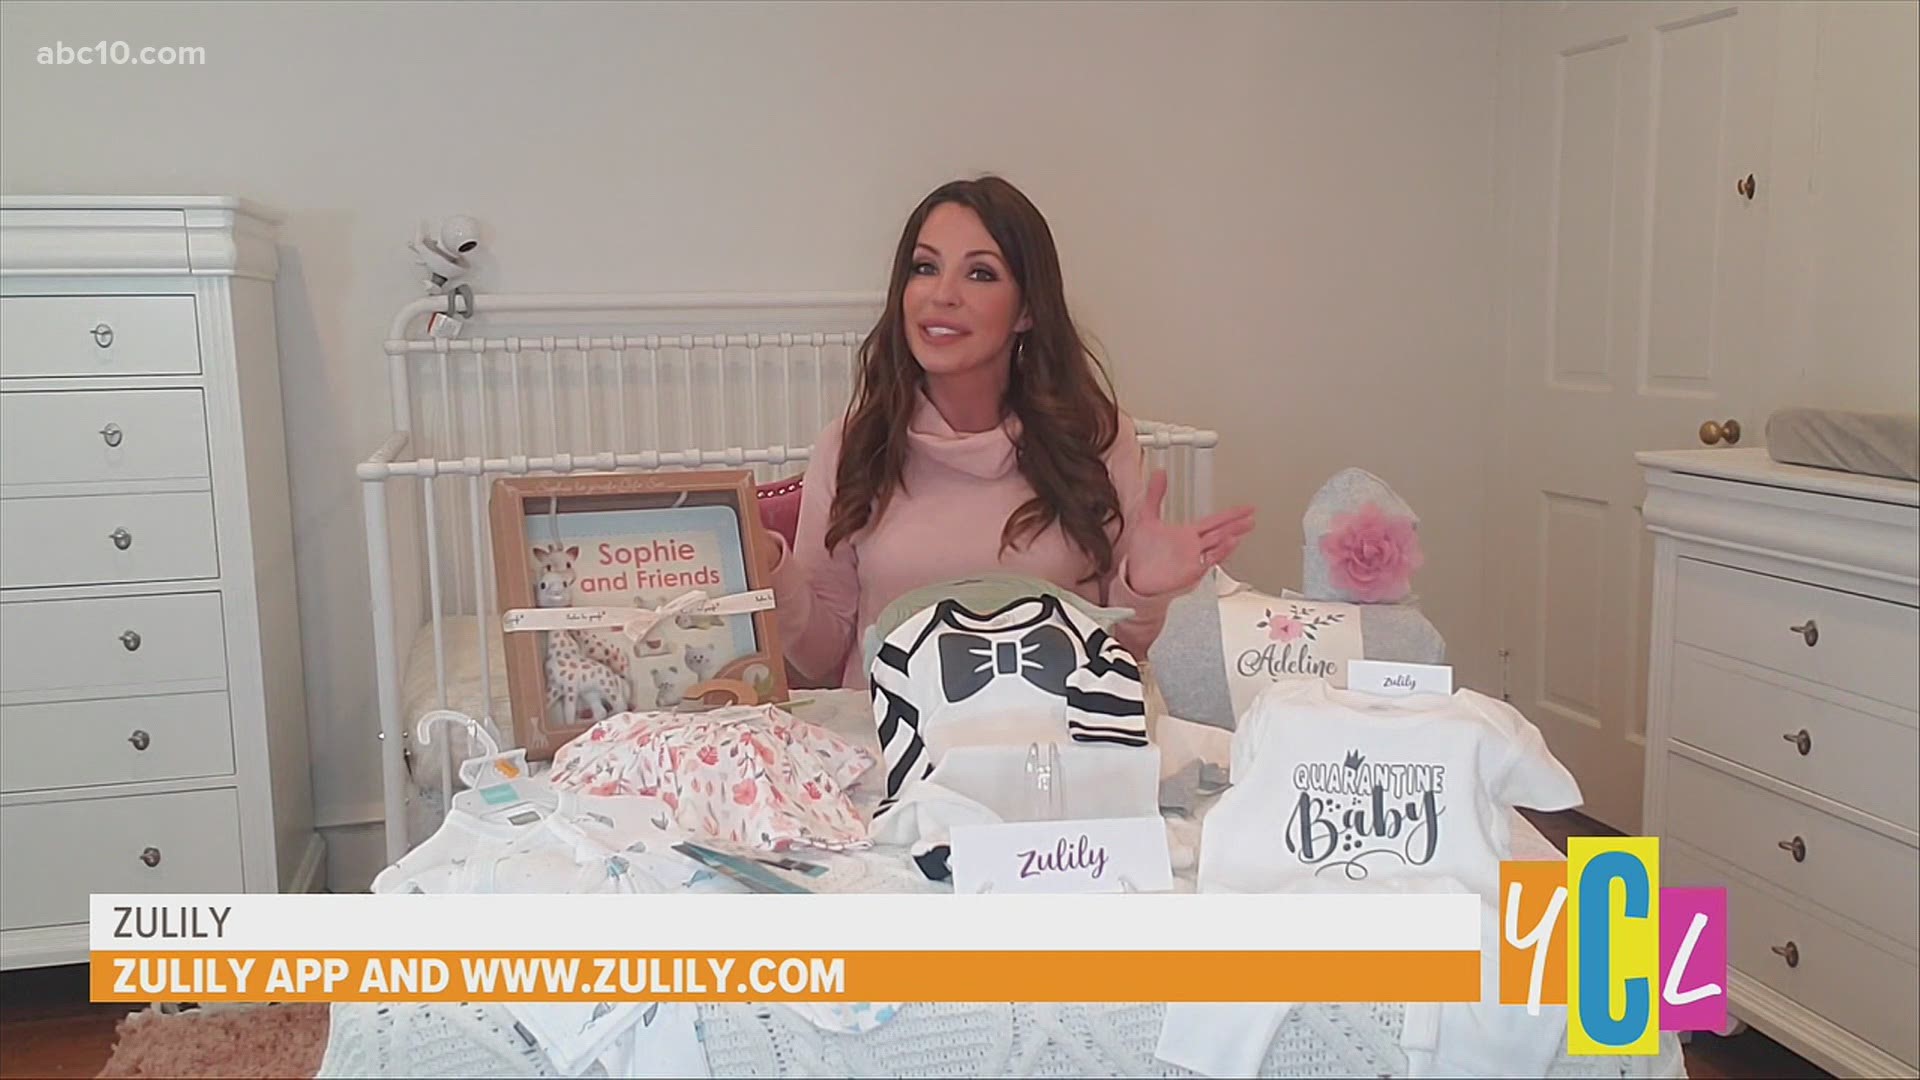 Helpful tips for new parents and news about an extra special month-long shopping specials for new parents. This segment was sponsored by Zulily.